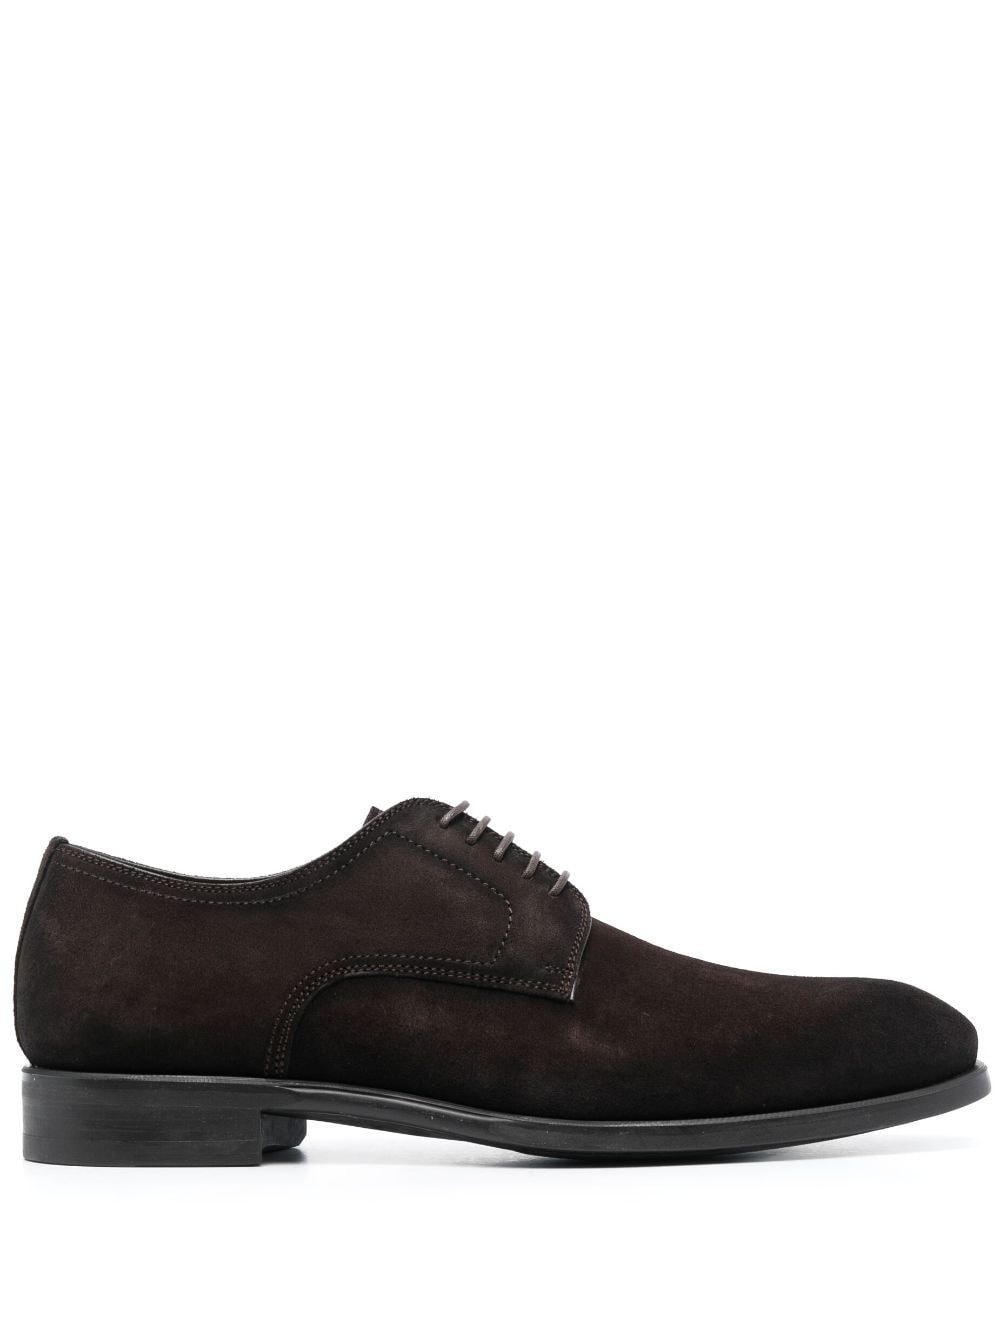 Image 1 of Magnanni almond-toe suede derbies